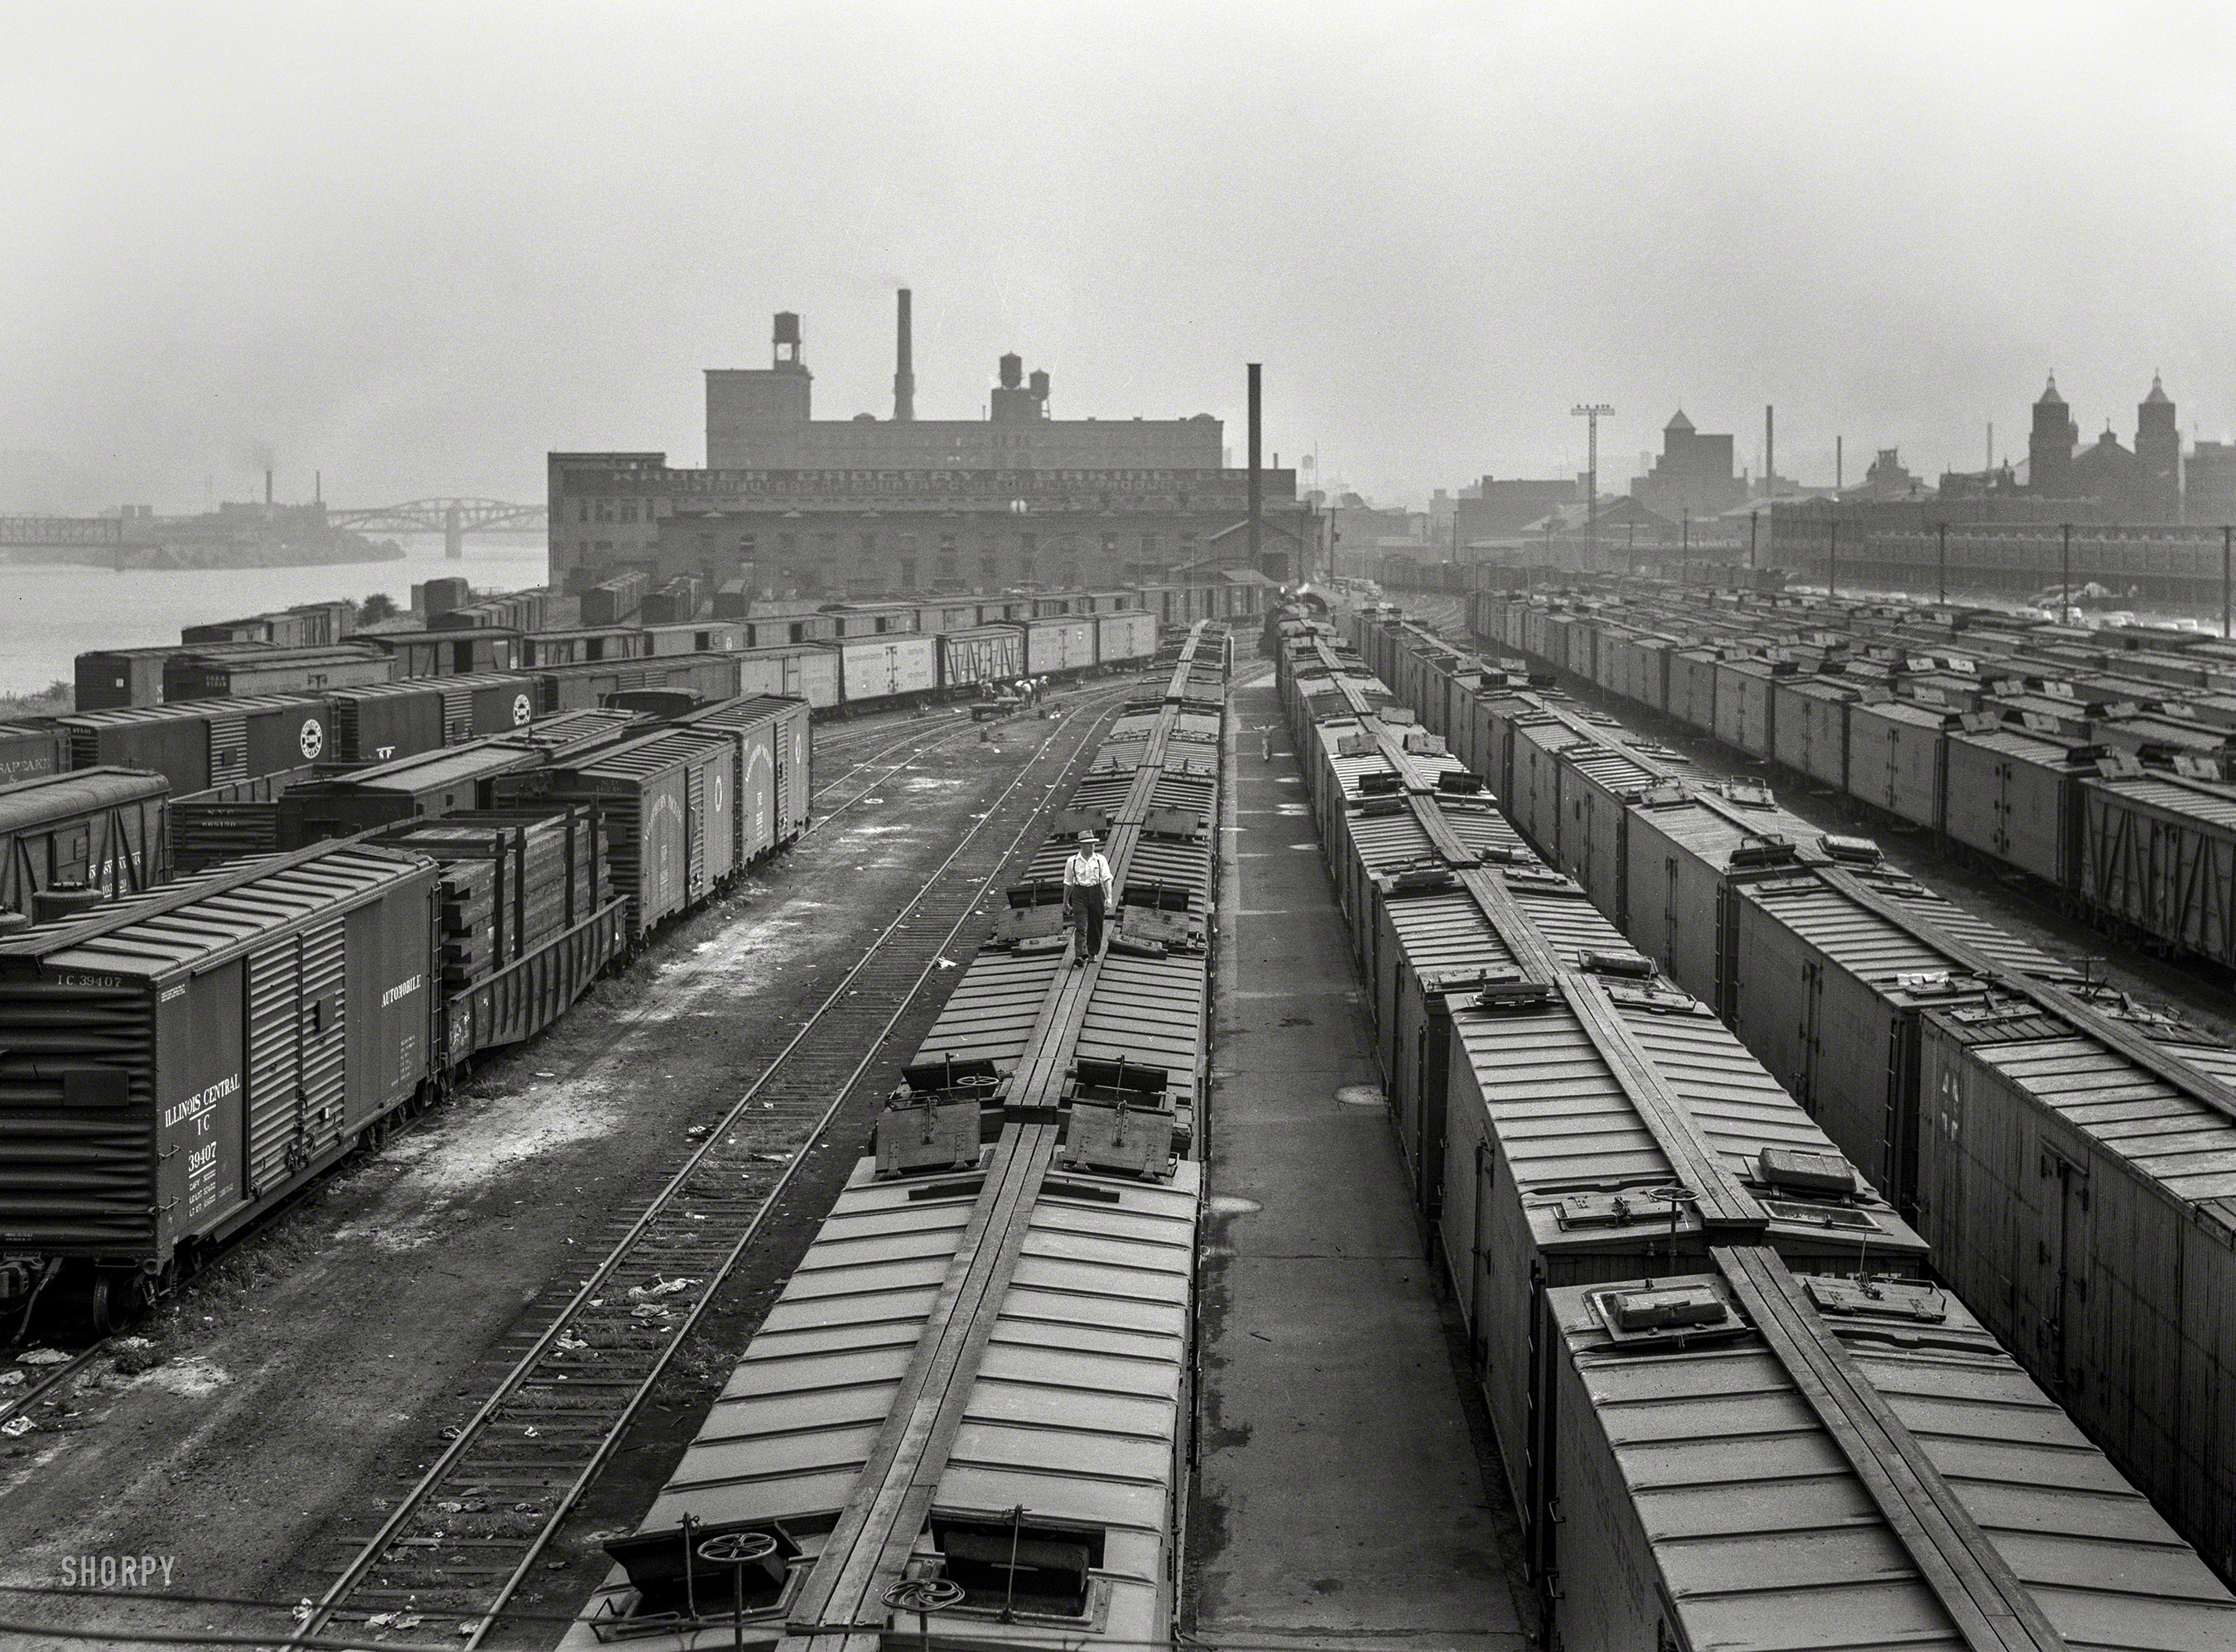 September 1942. The Kroger warehouse in Pittsburgh, Pennsylvania. "Freight car movements. With transportation assuming vast new importance in wartime America, movement of freight cars must be accomplished with the fullest efficiency and speed. Loss and diversion of ocean carriers which served our seaboard cities have thrown an enormous burden upon the railroads." 4x5 inch nitrate negative by Ann Rosener for the Office of War Information. View full size.